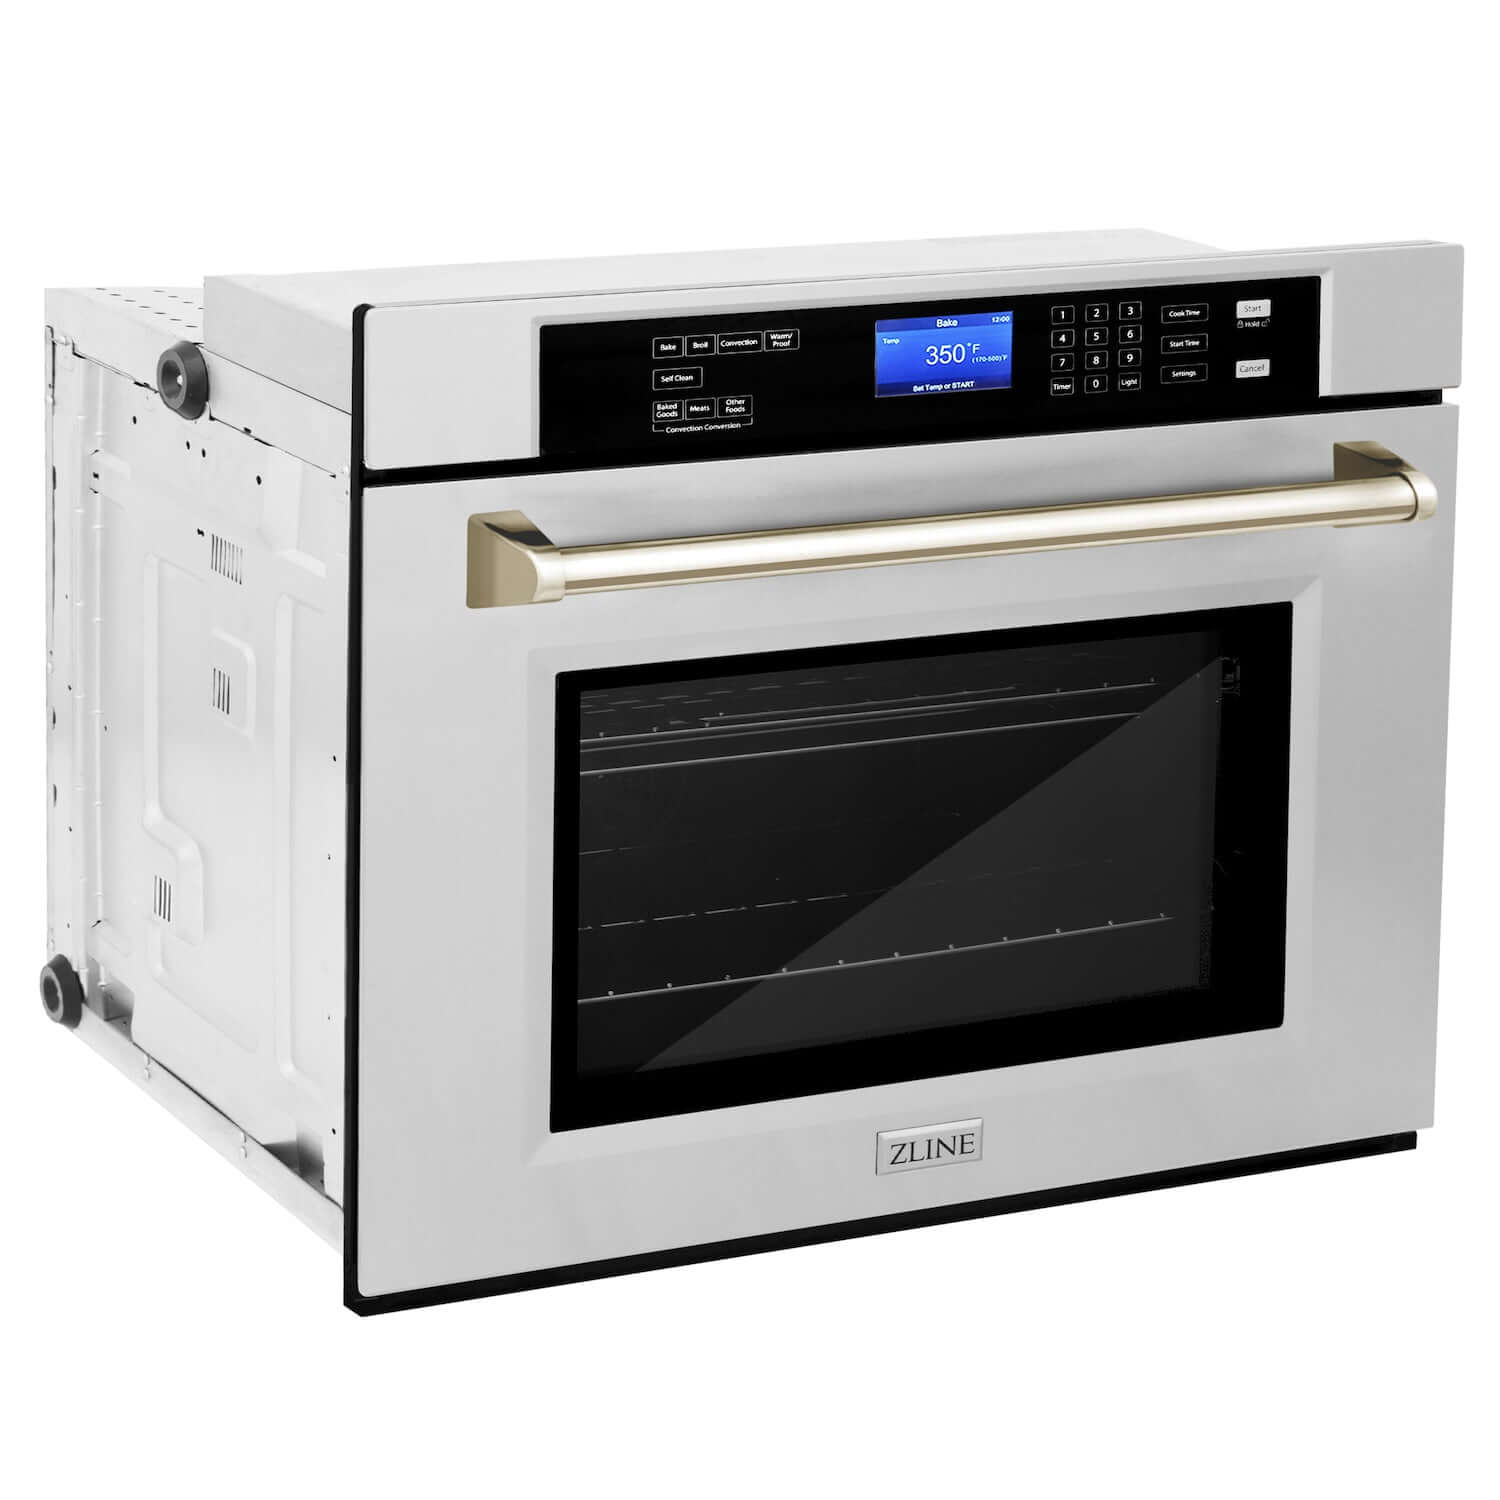 ZLINE Autograph Edition 30 in. Electric Single Wall Oven with Self Clean and True Convection in Stainless Steel and Polished Gold Accents (AWSZ-30-G) side, closed.